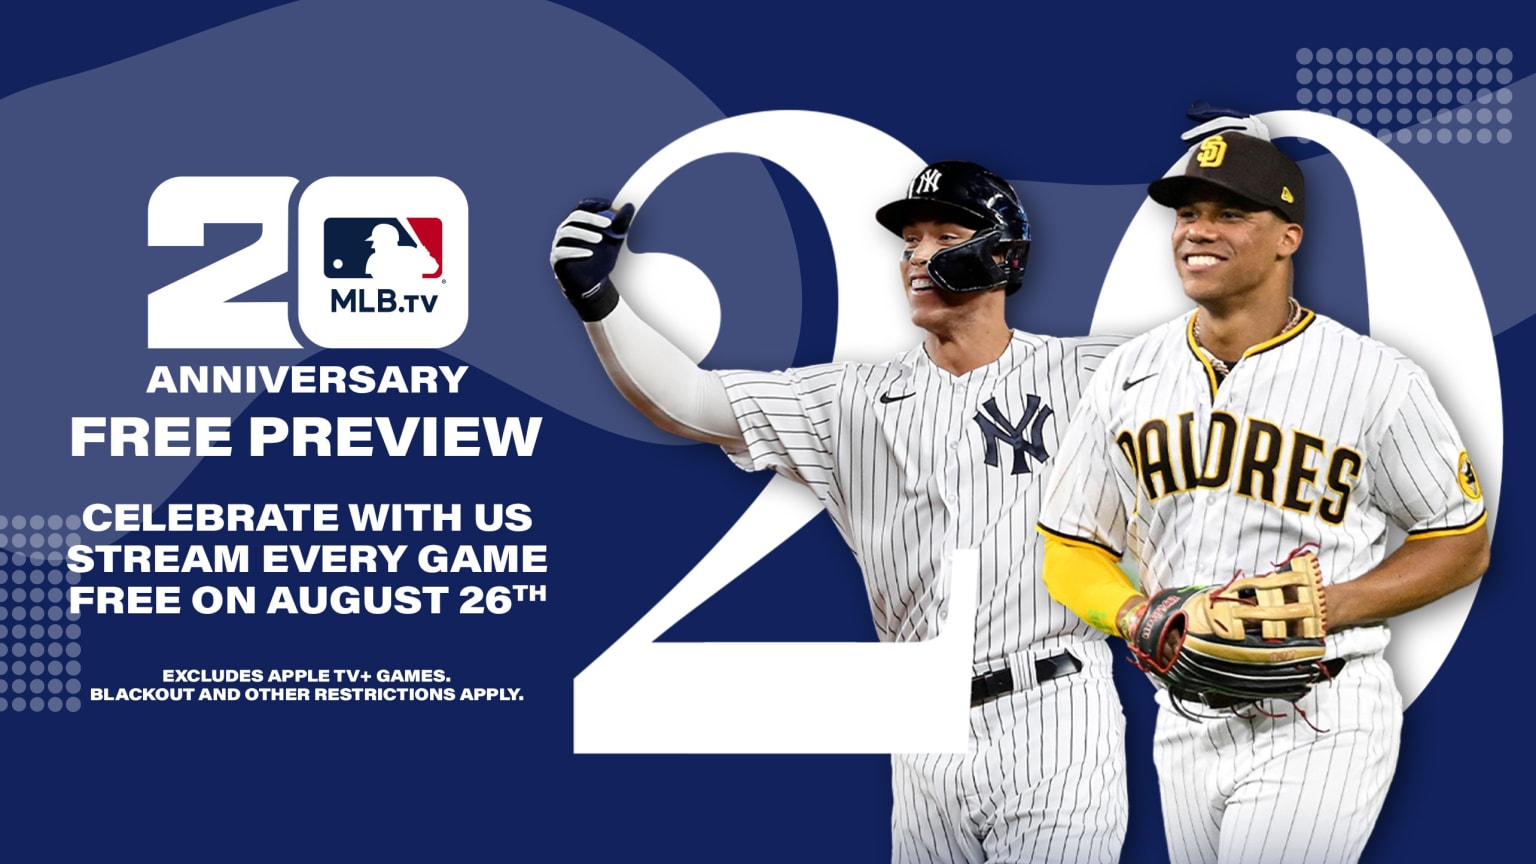 Text on the left reads: ''20th anniversary free preview. Celebrate with us. Stream every game free on August 26th. Excludes Apple TV+ games. Blackout and other restrictions apply.'' On the right, a smiling Aaron Judge and a smiling Juan Soto